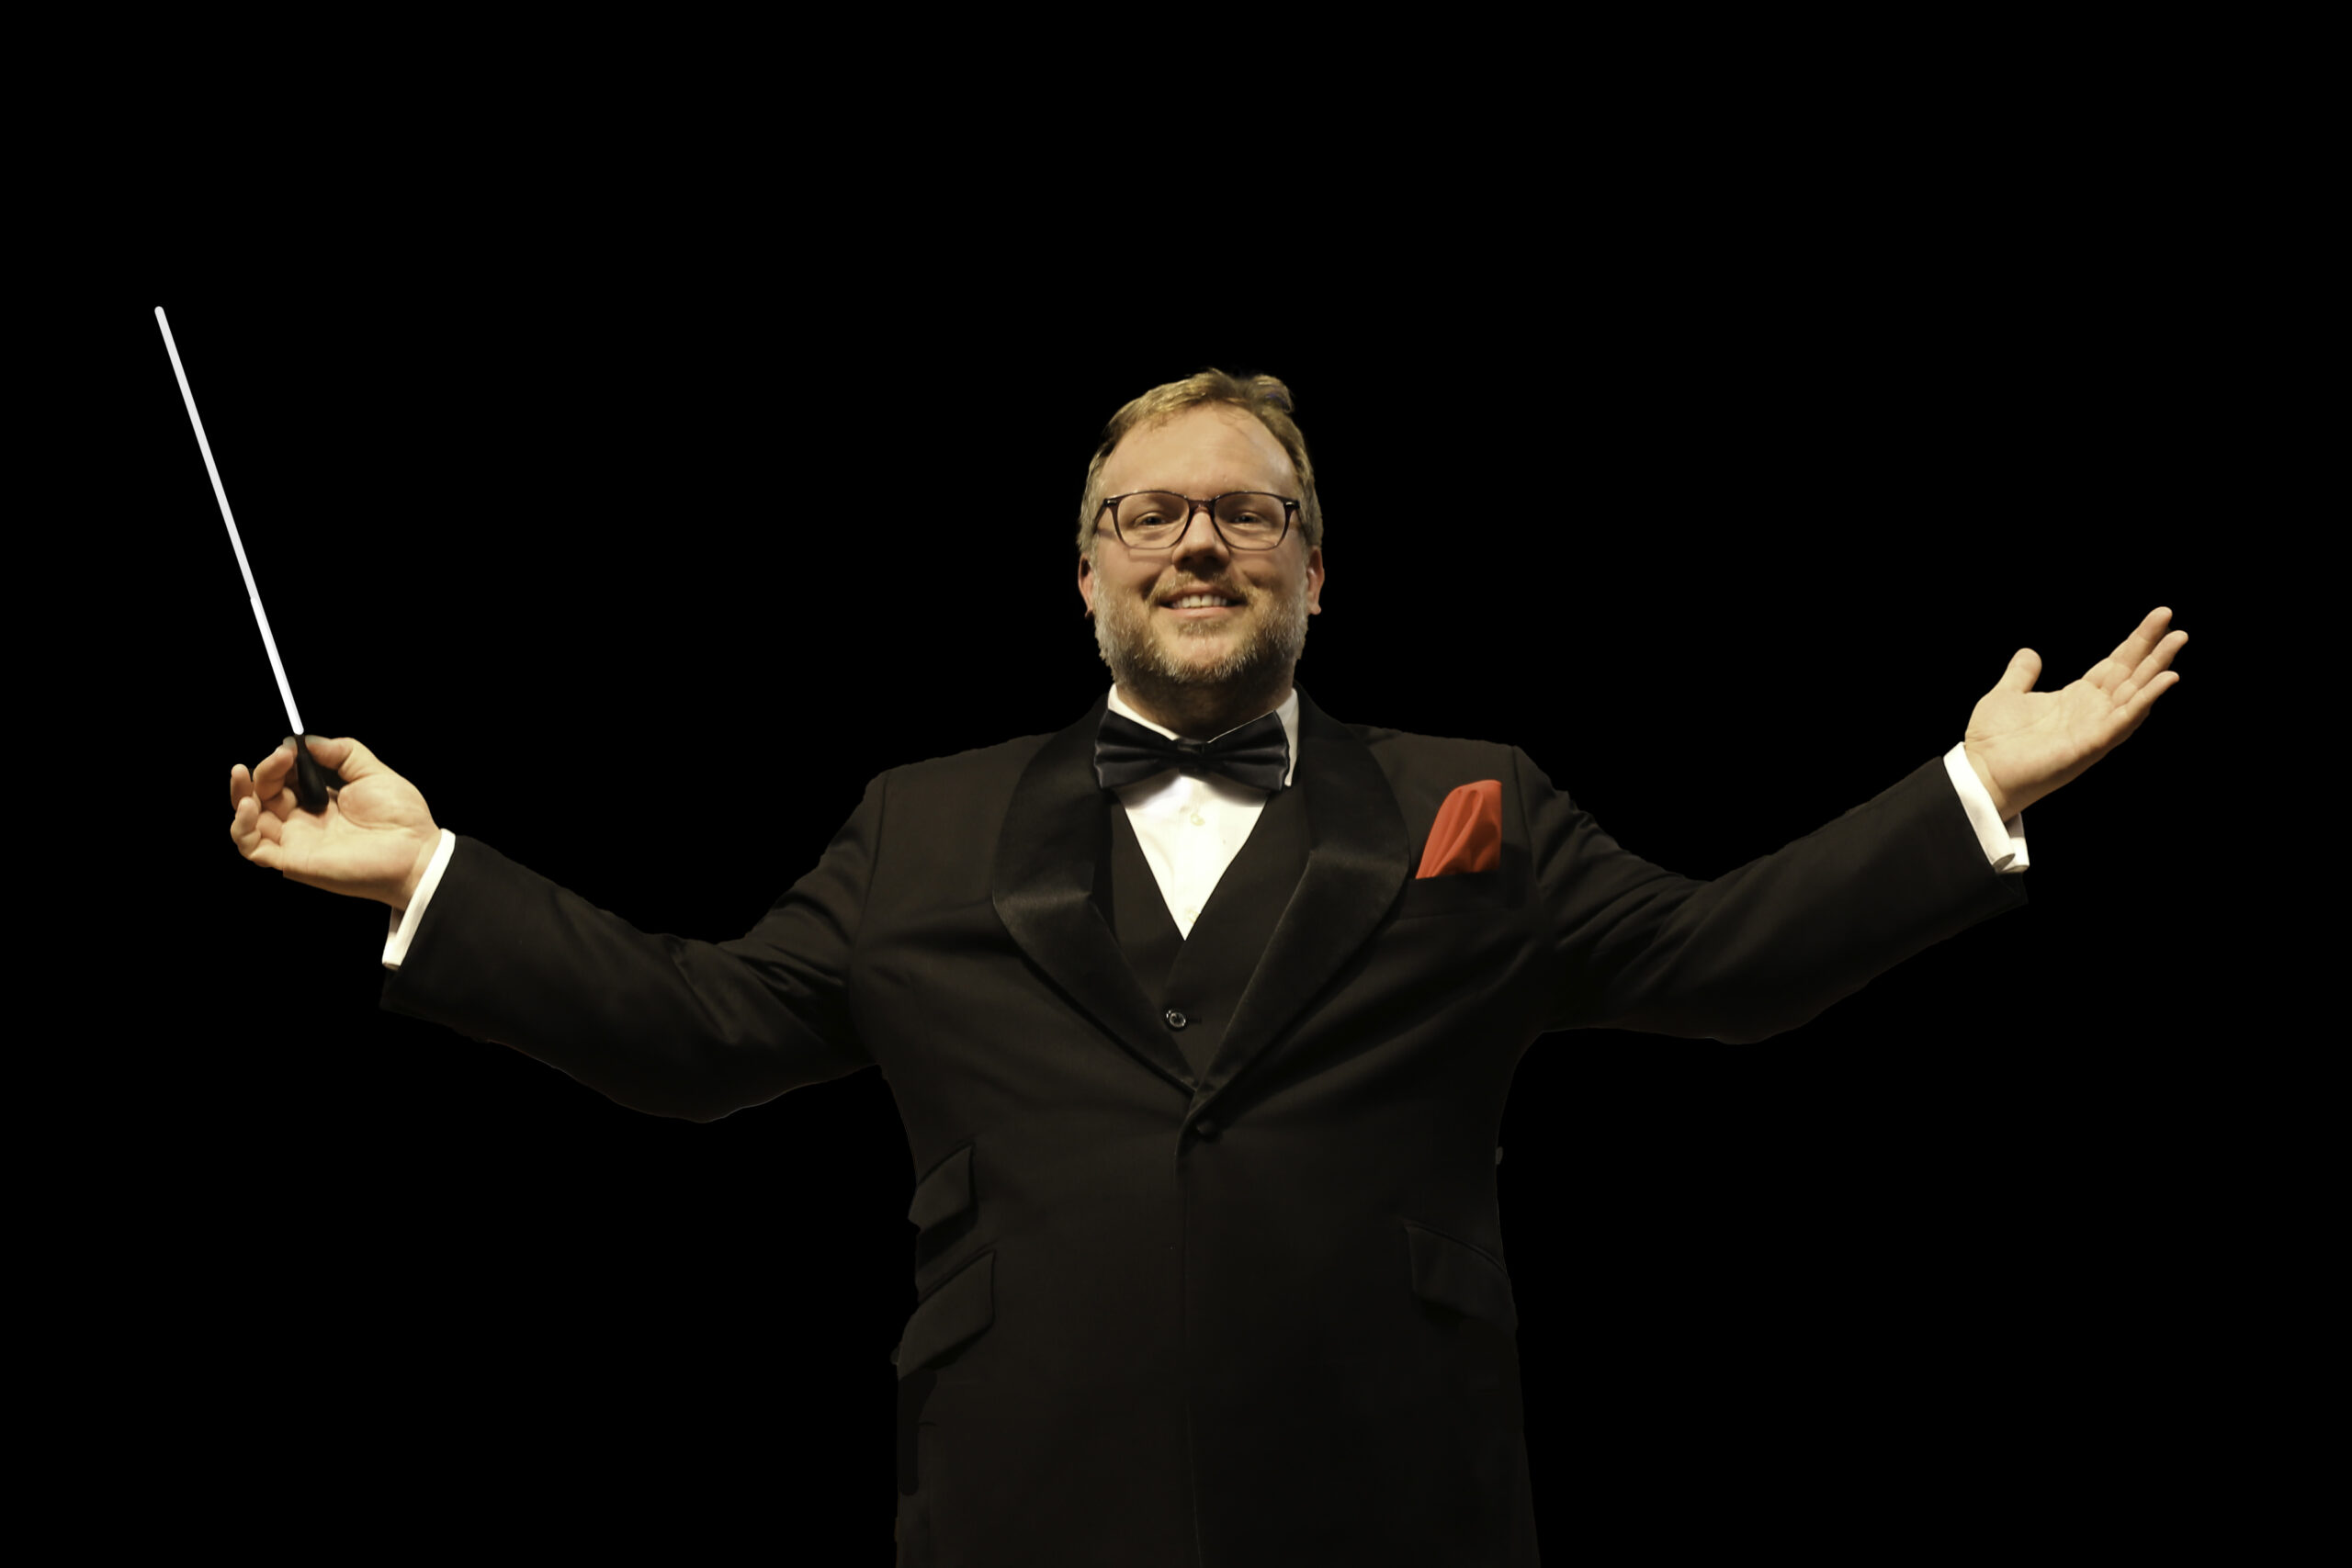 Dr. Dustin Ousley, Artistic Director